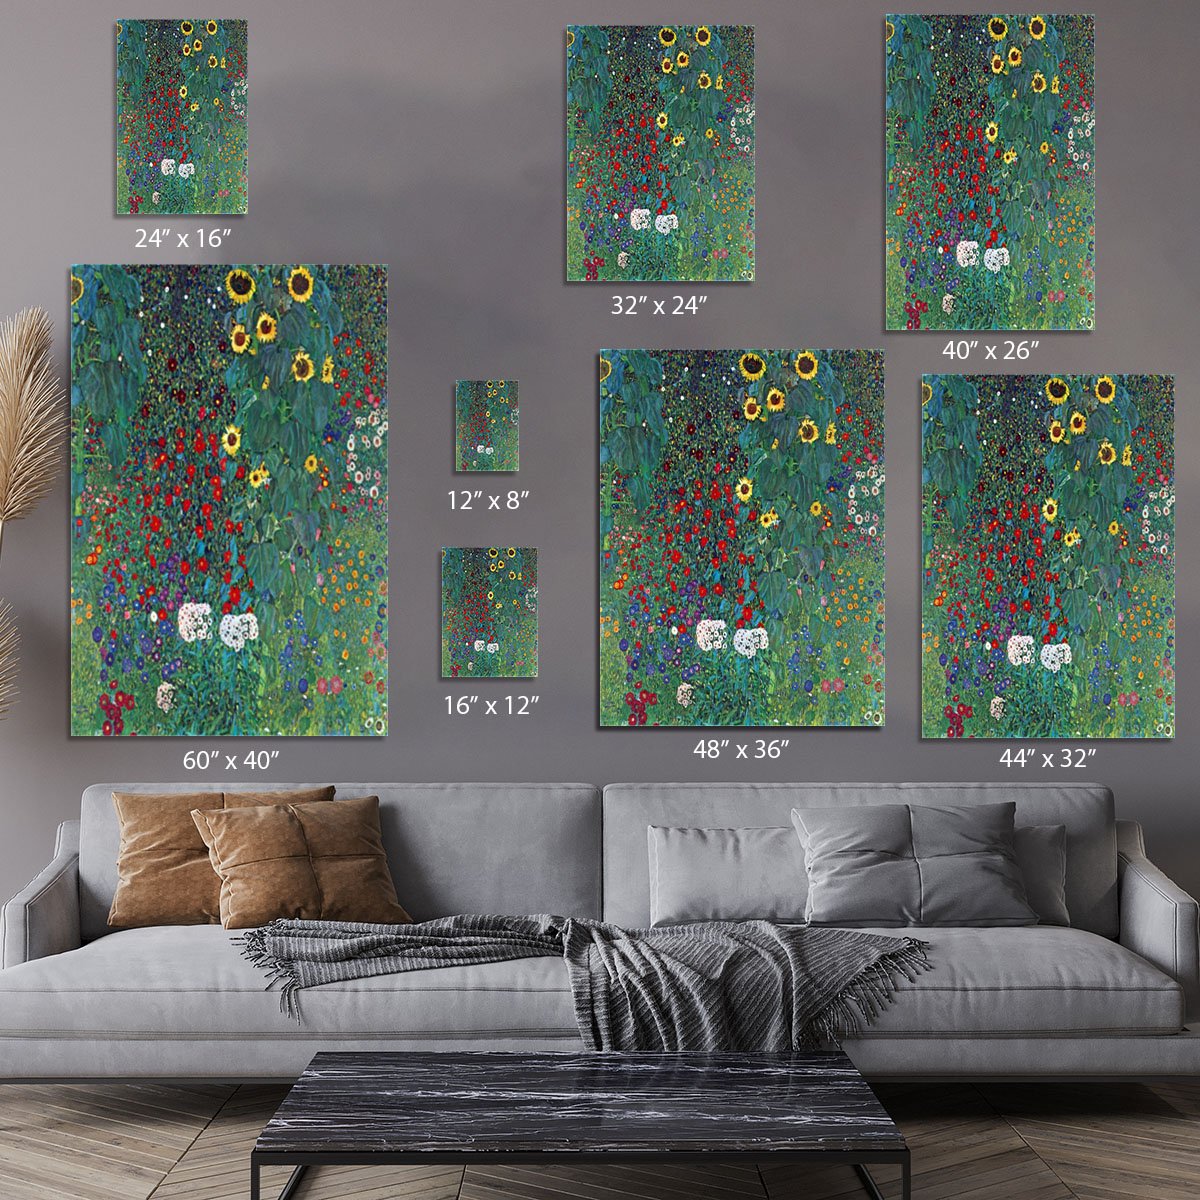 Garden with Crucifix 2 by Klimt Canvas Print or Poster